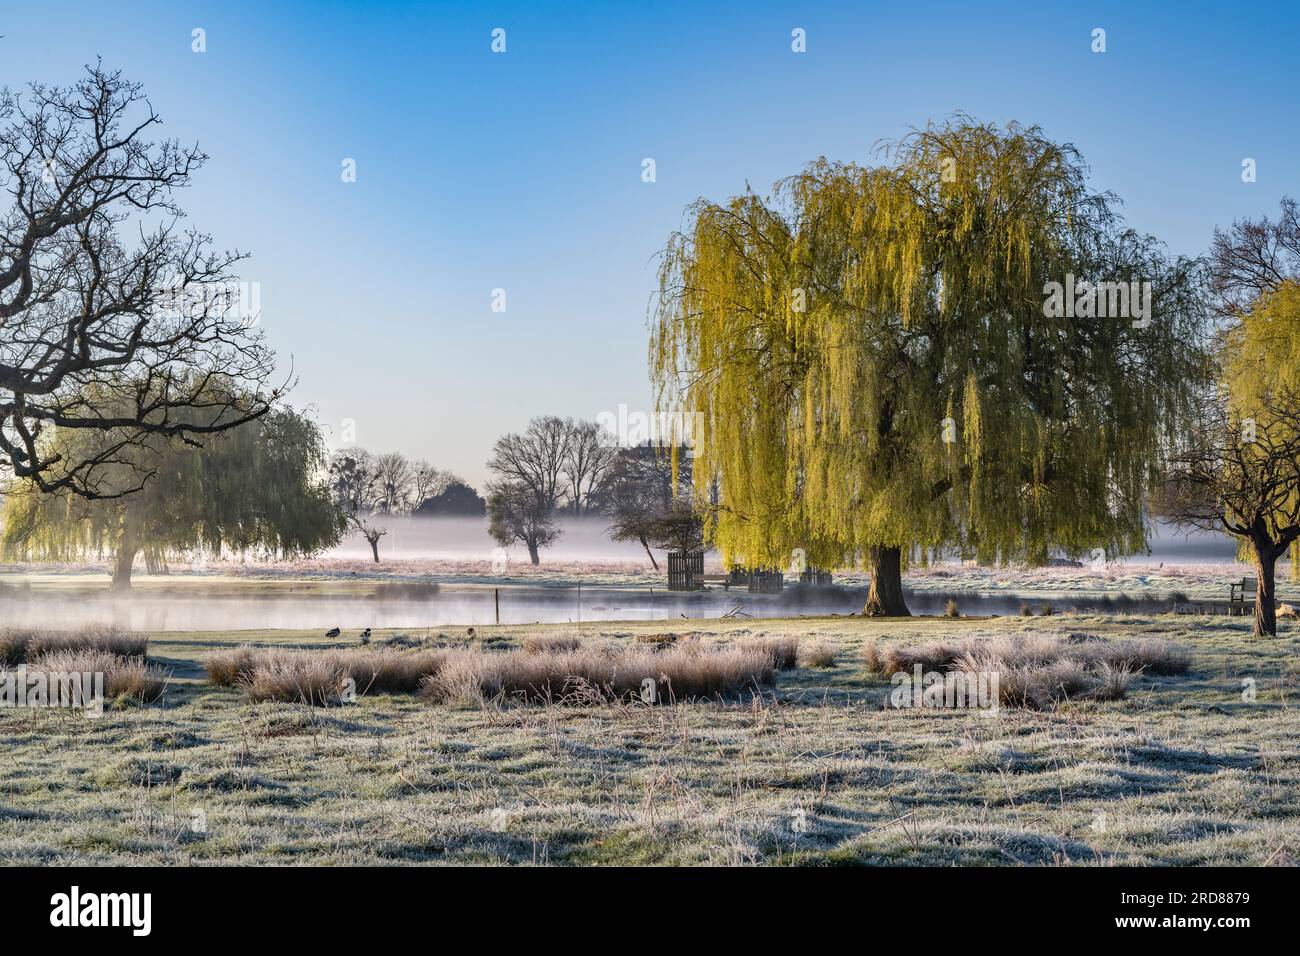 Natures wonderland of frost mist and sunshine with the magificent Weeping Willow tree next to a pond Stock Photo